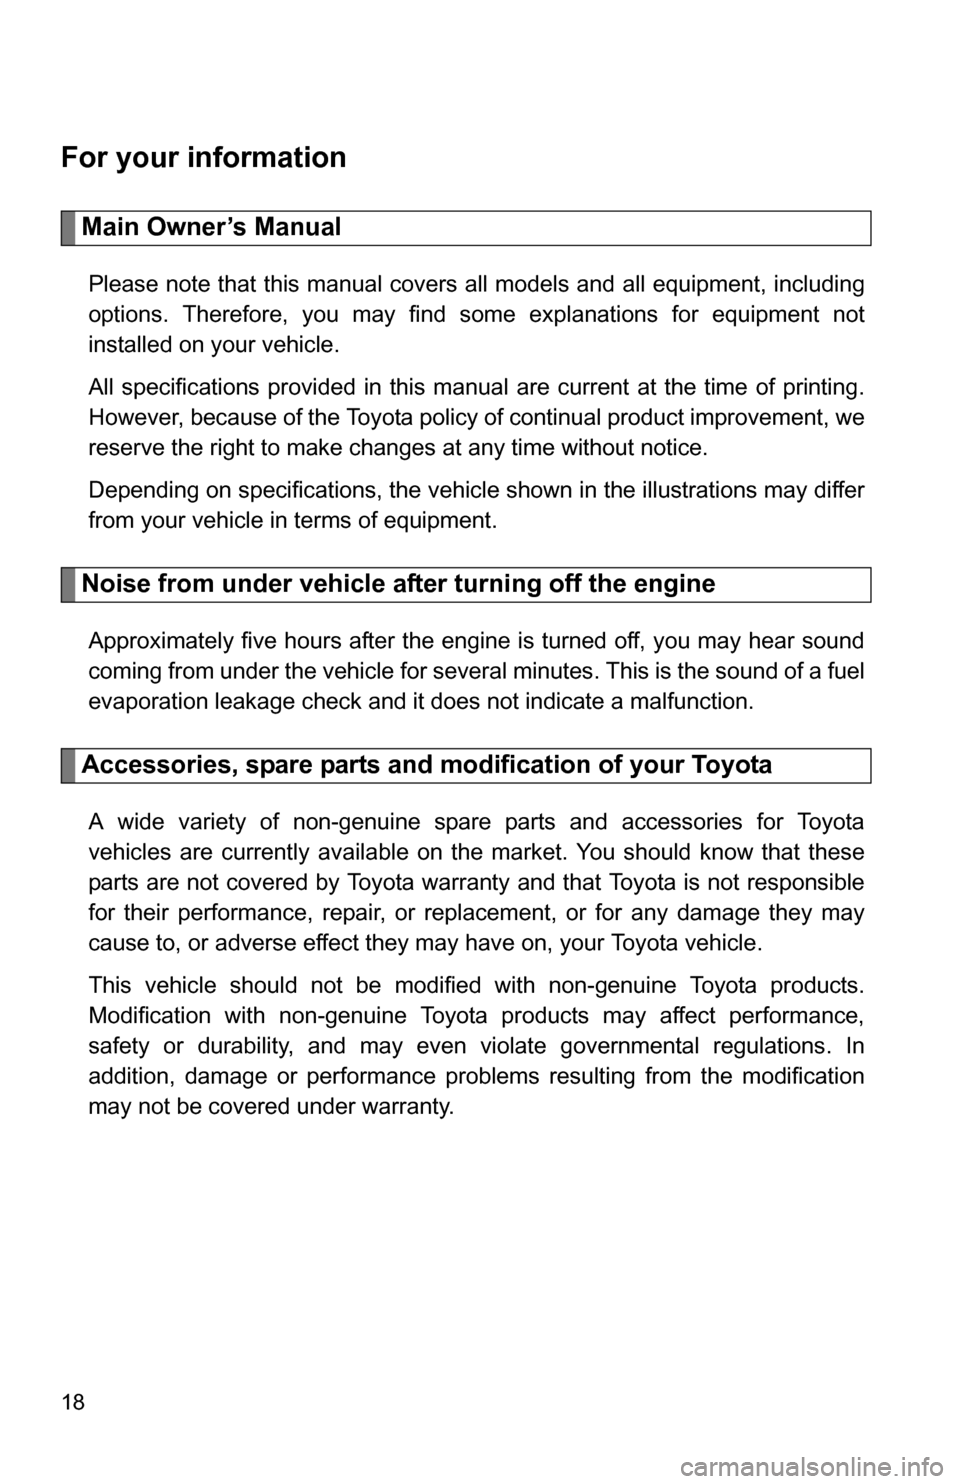 TOYOTA RAV4 2012 XA30 / 3.G Owners Manual 18
For your information
Main Owner’s Manual
Please note that this manual covers all models and all equipment, including
options. Therefore, you may find some explanations for equipment not
installed